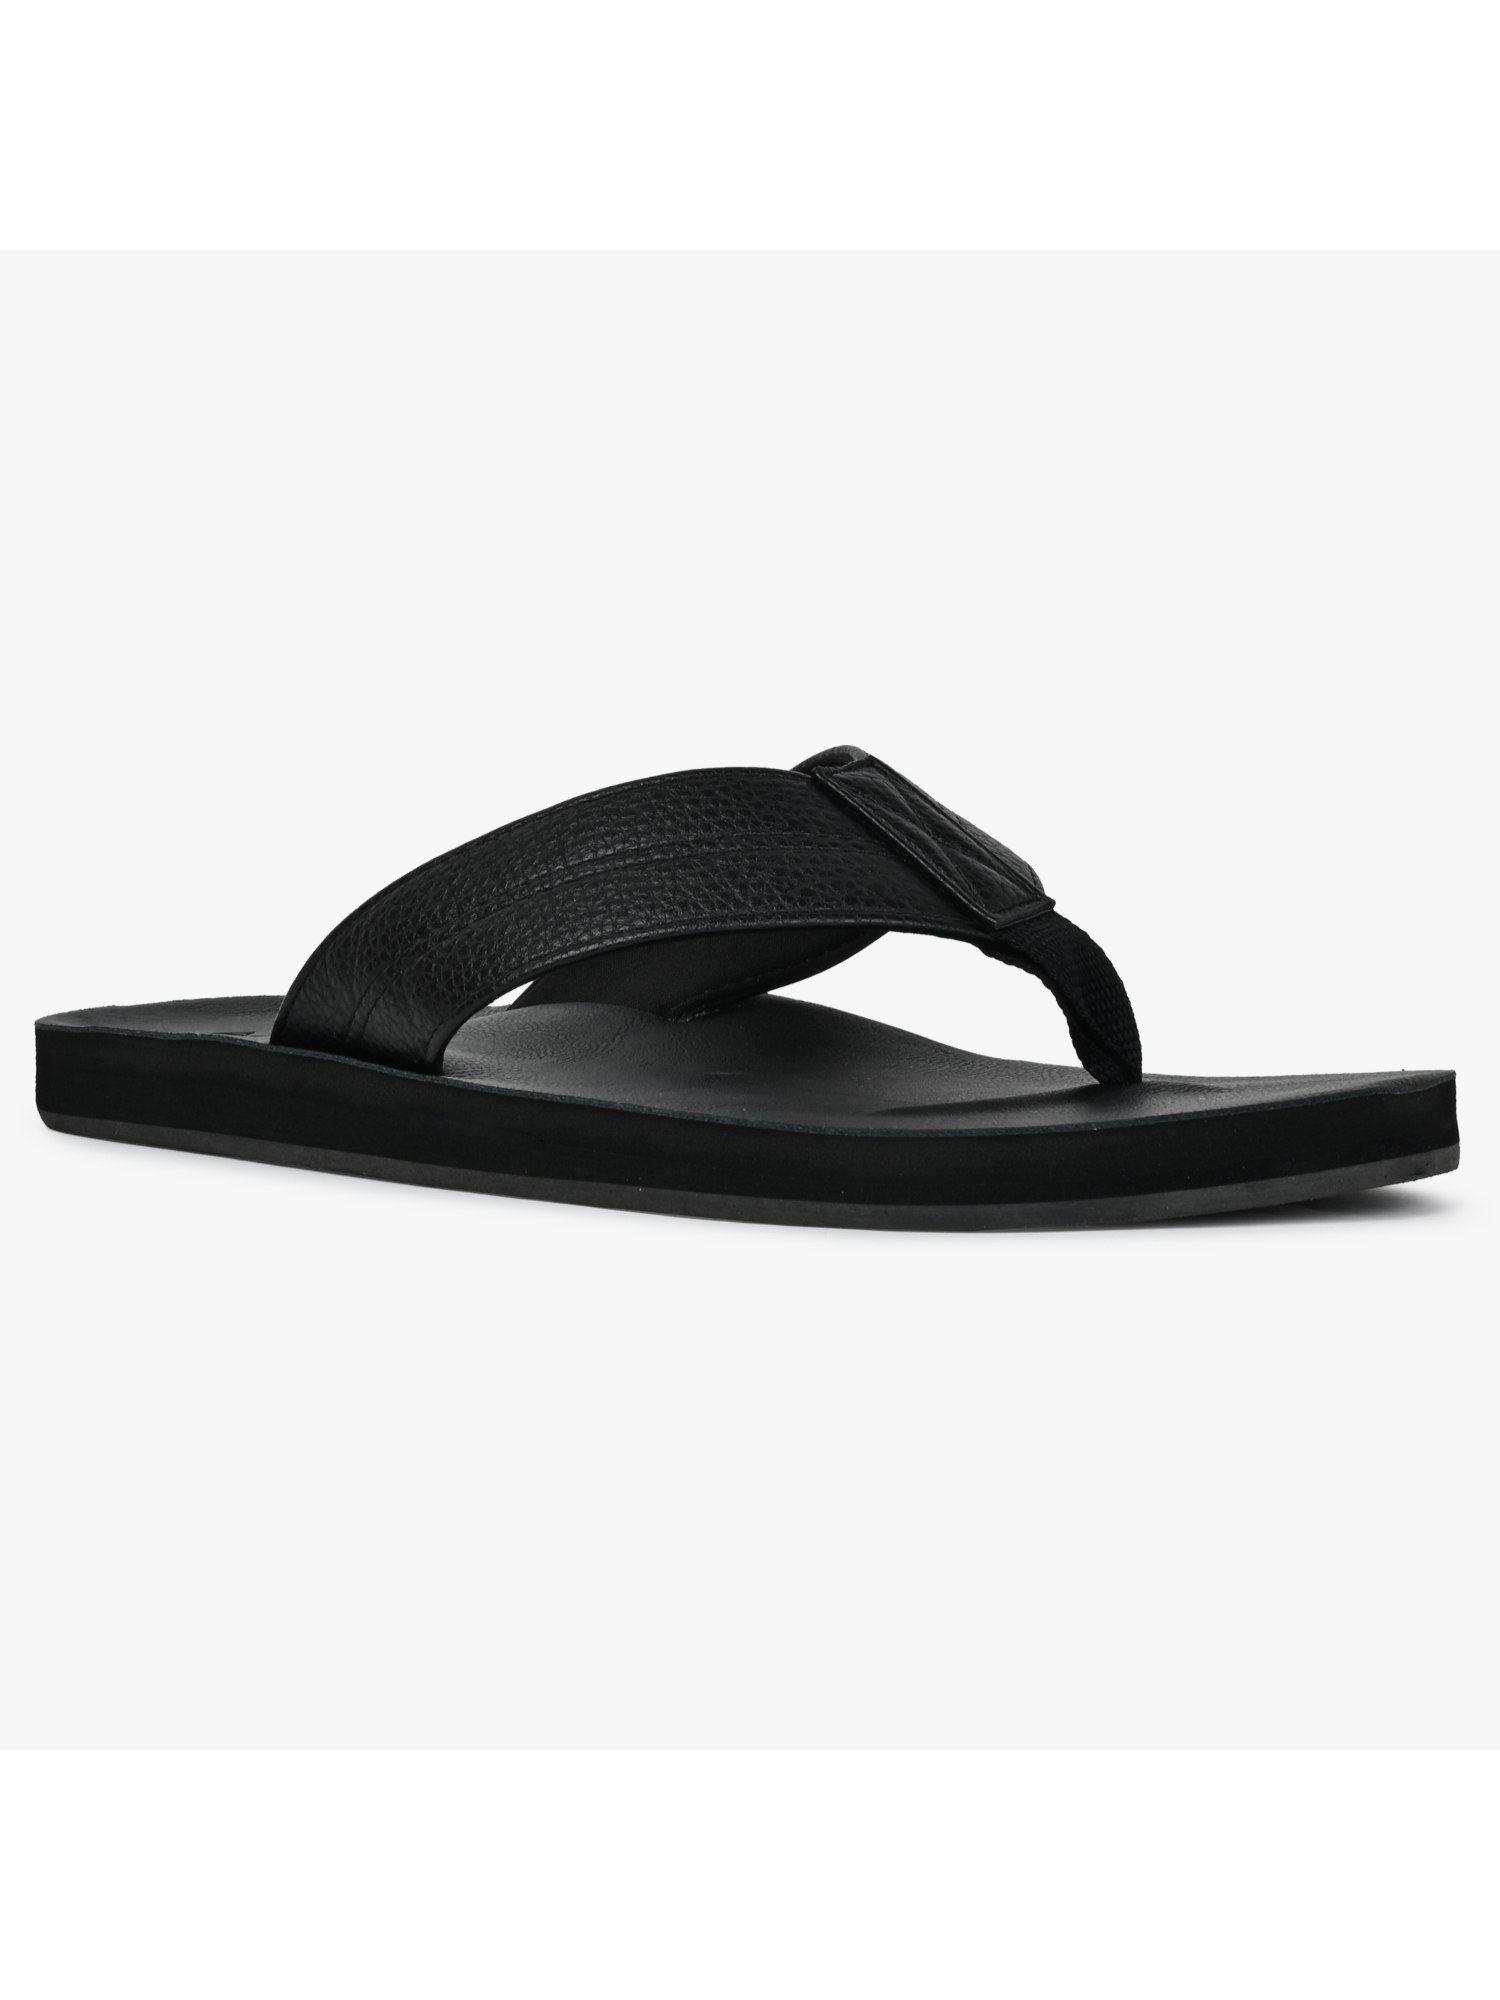 tribord001-black-synthetic-flipflops